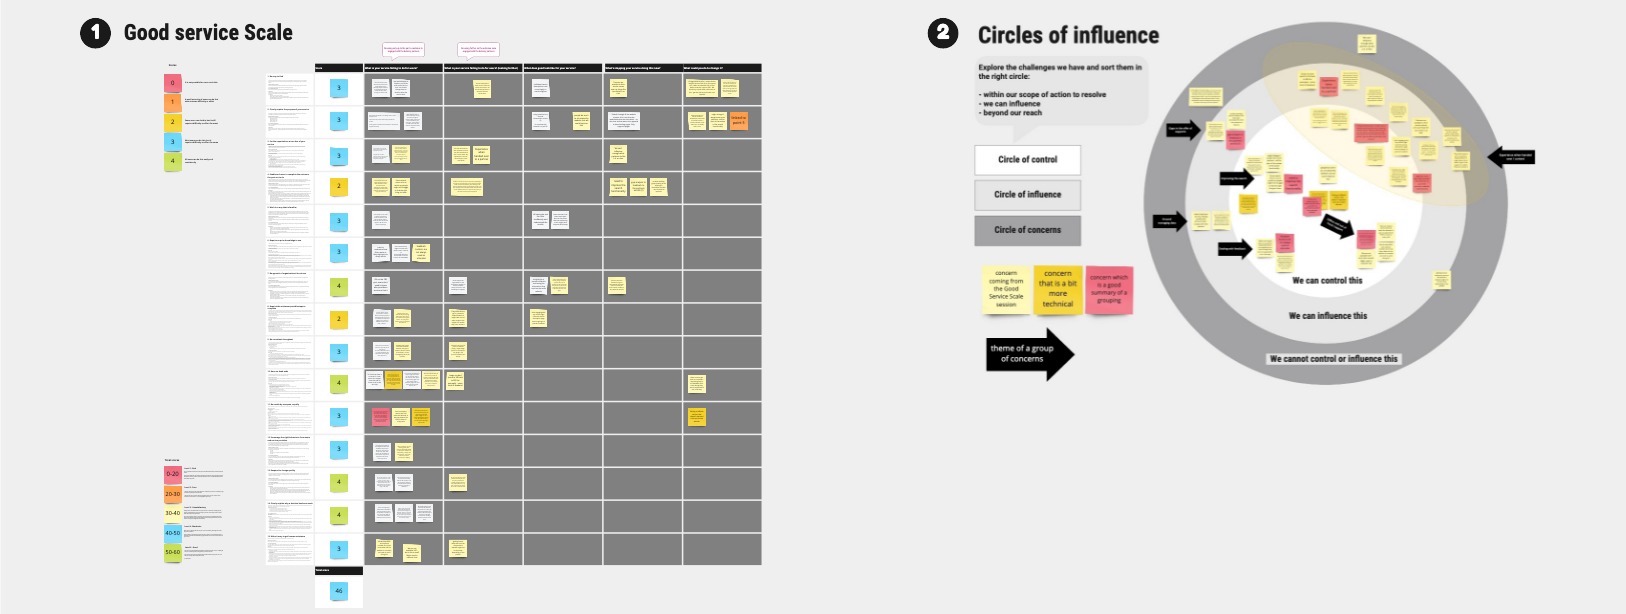 visuals of work - good service scale example first and circles of influence next